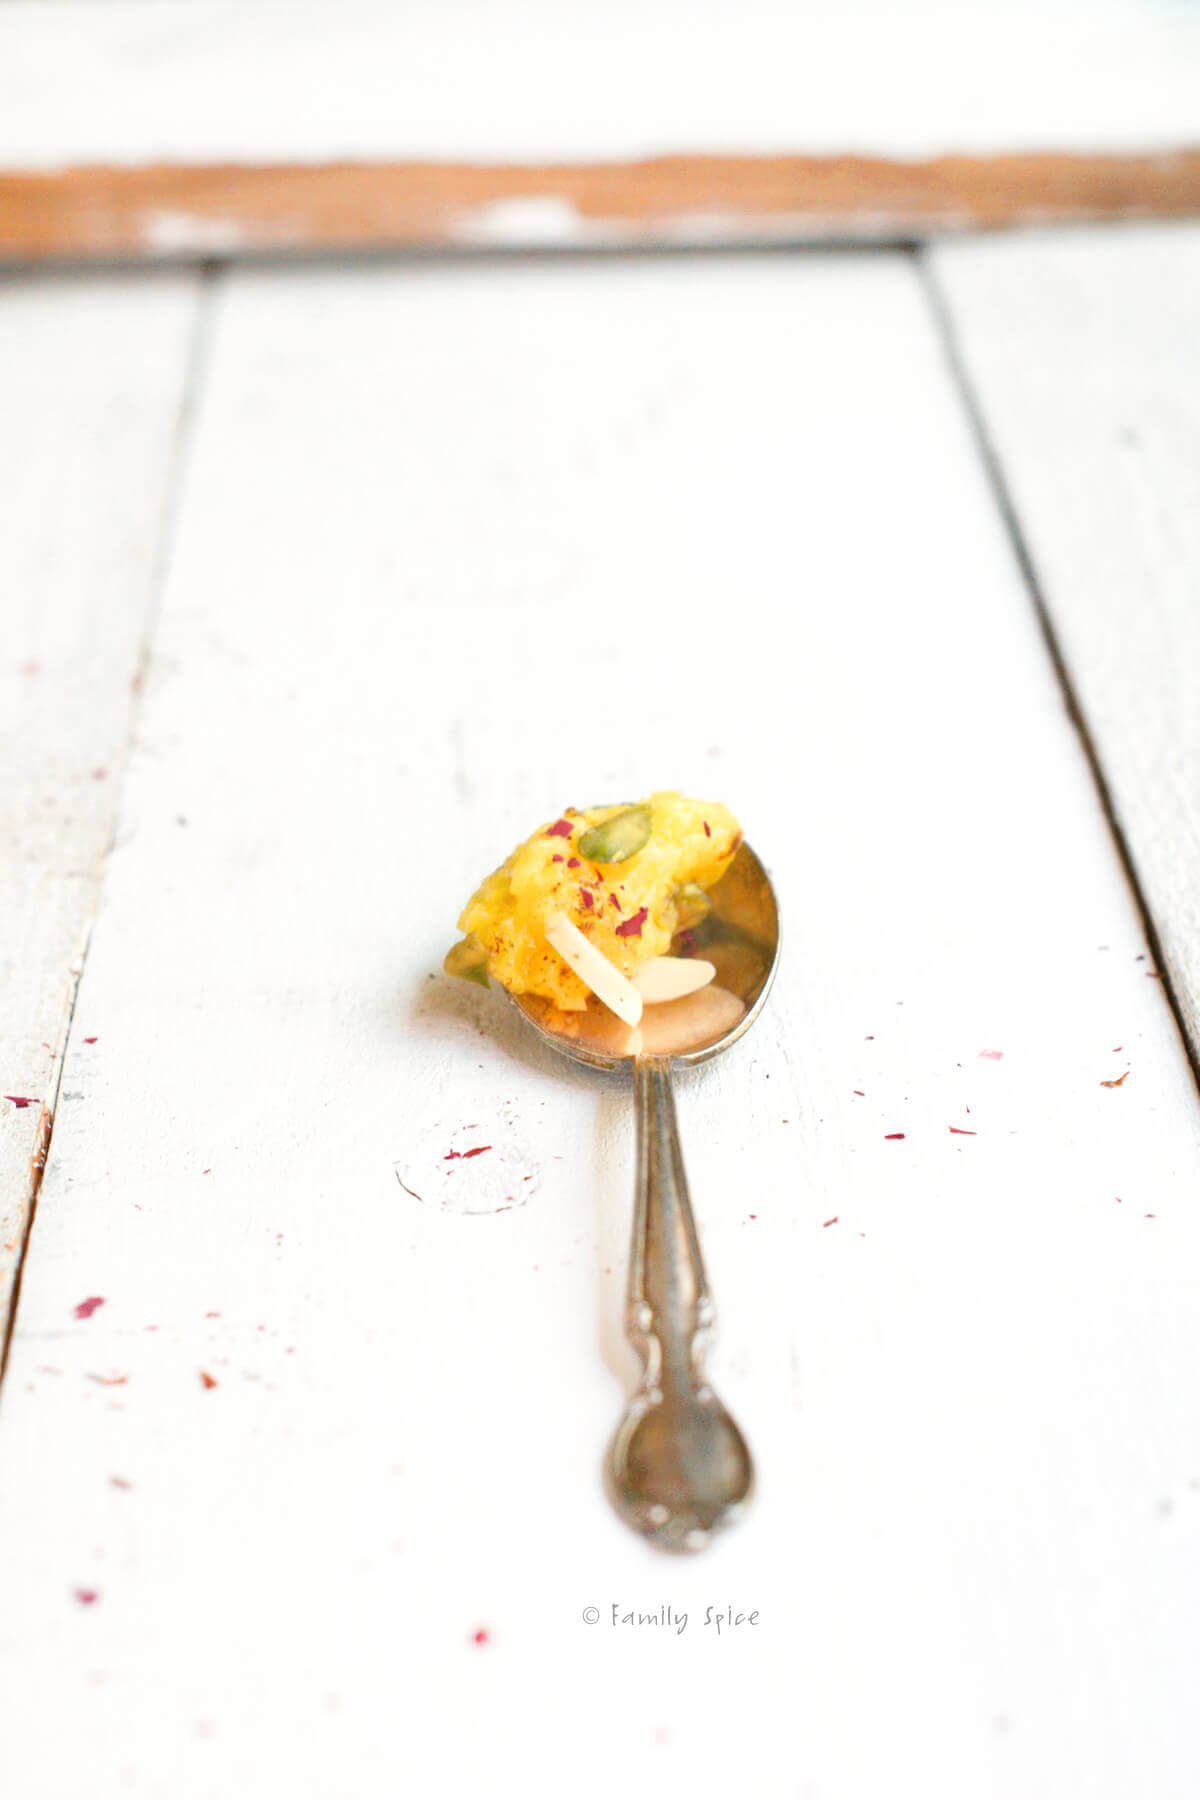 An ornate silver spoon holding shole zard garnished with cinnamon, rose petals, pistachios and almonds